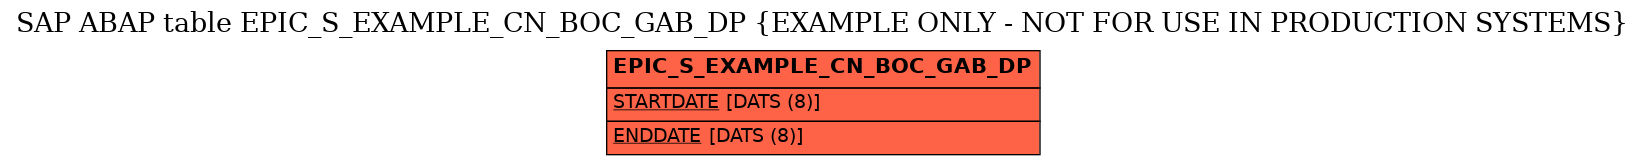 E-R Diagram for table EPIC_S_EXAMPLE_CN_BOC_GAB_DP (EXAMPLE ONLY - NOT FOR USE IN PRODUCTION SYSTEMS)